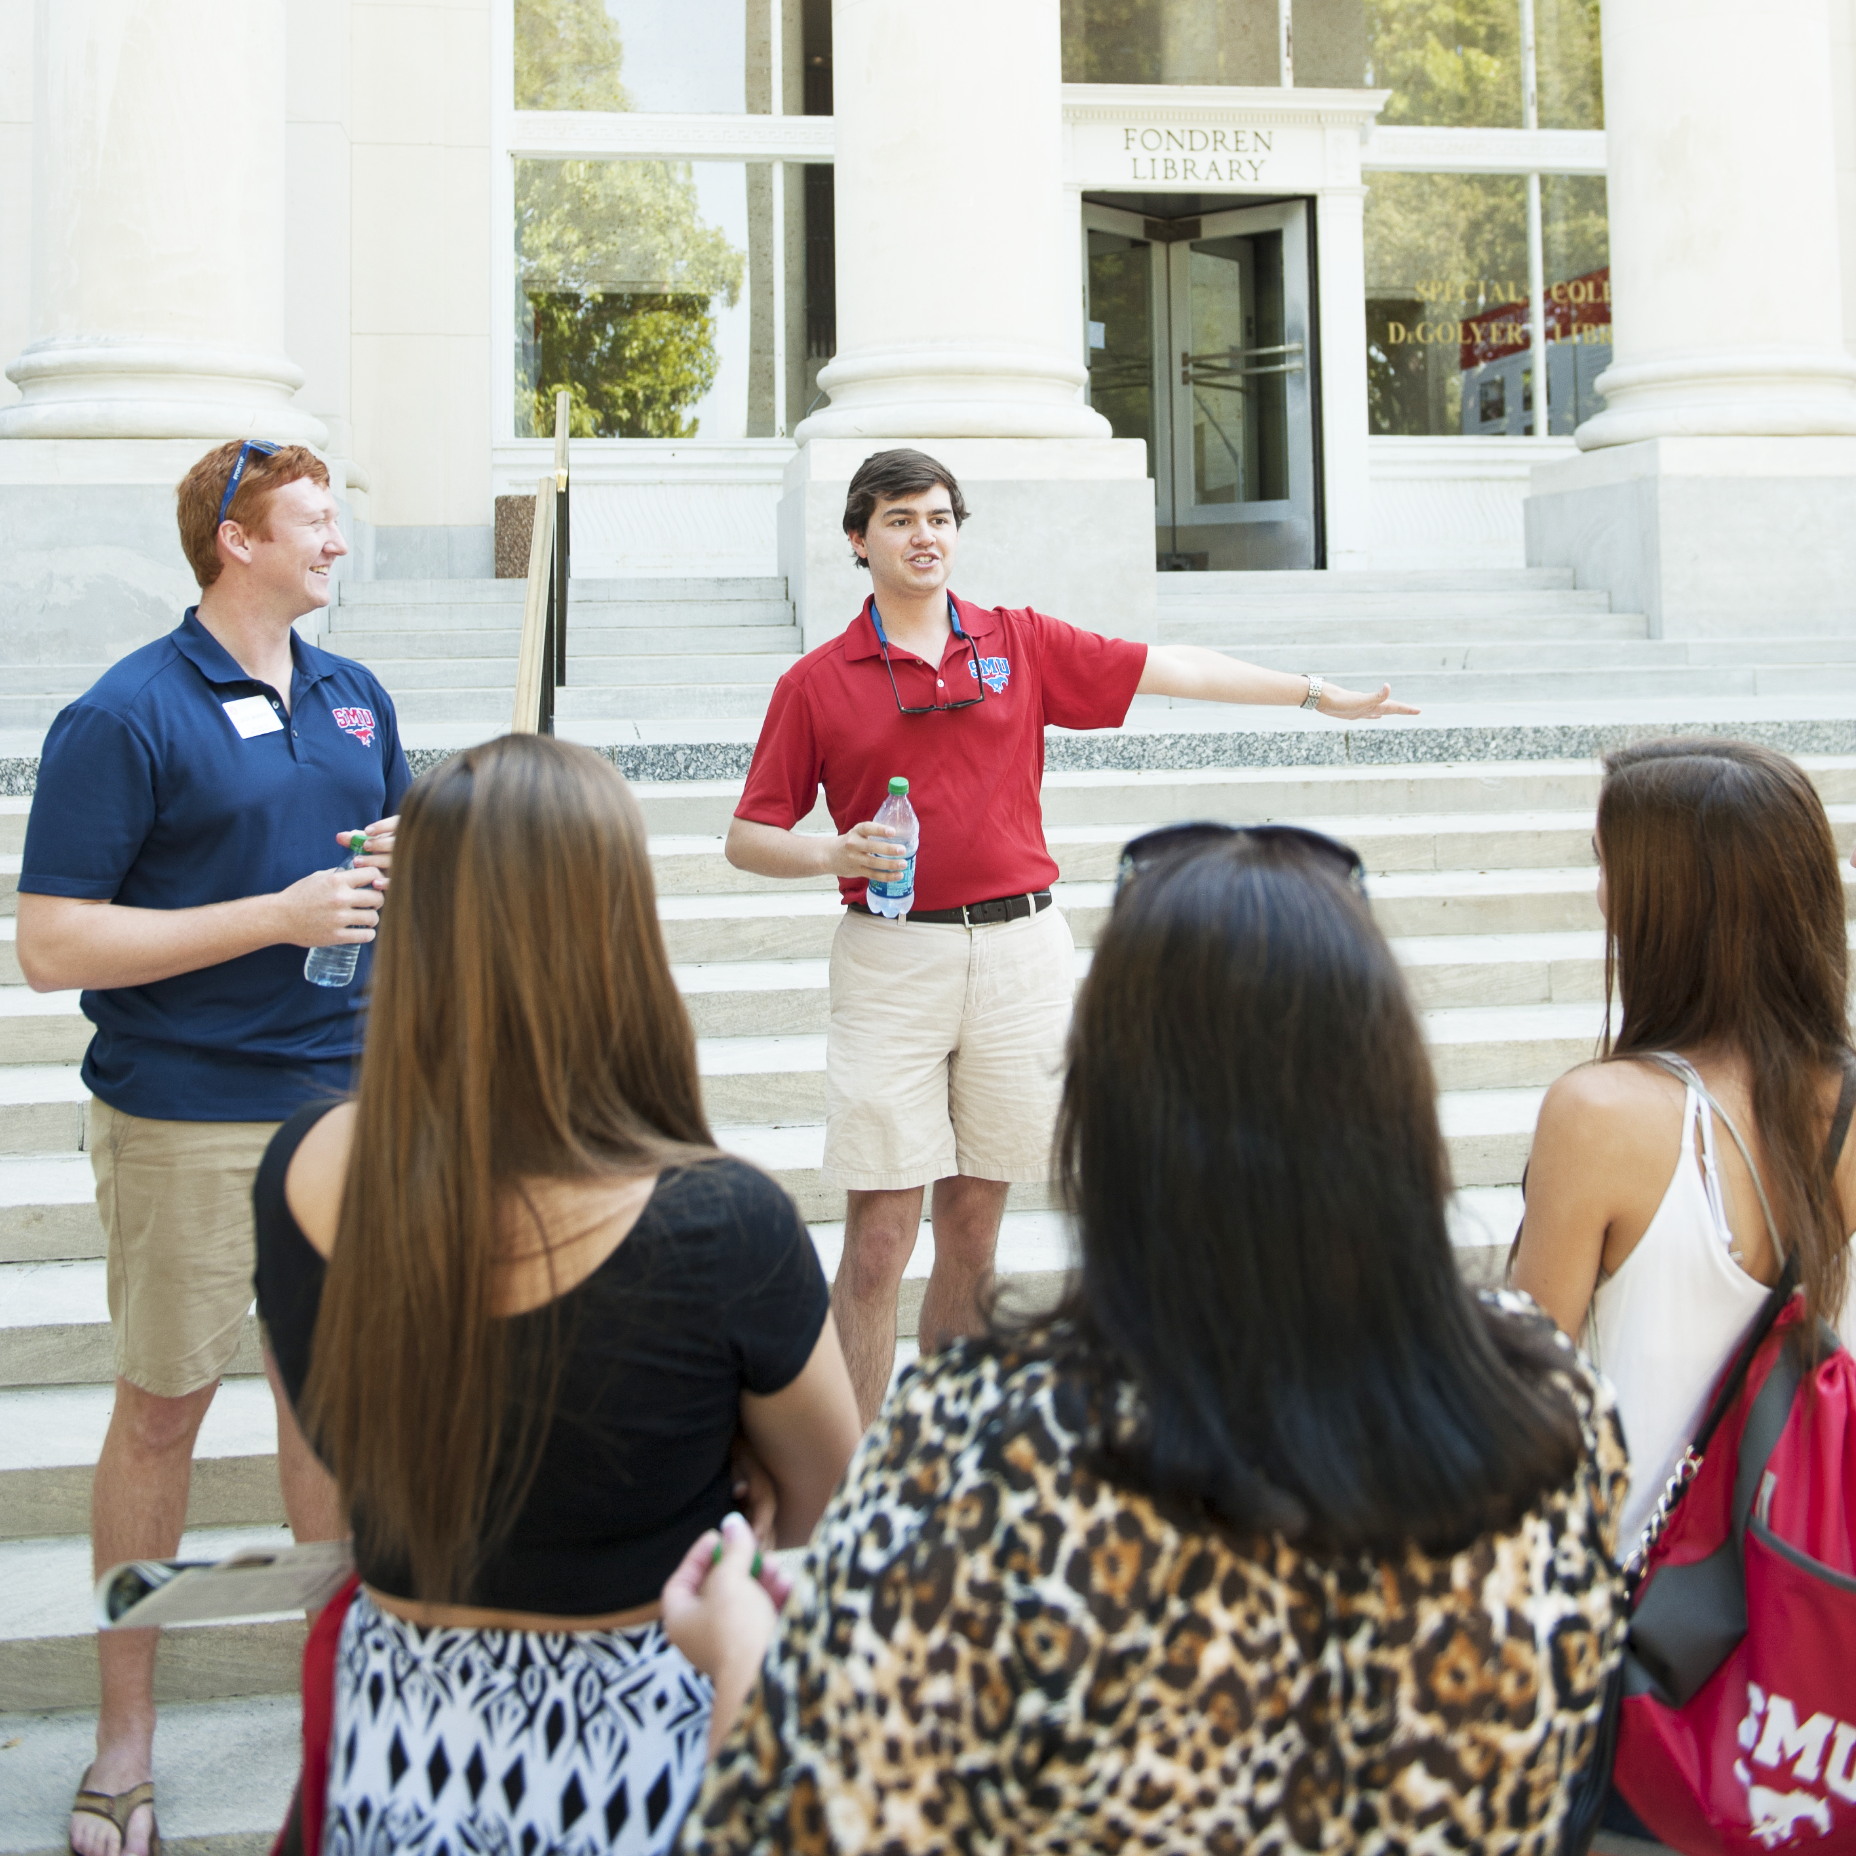 Student leads a campus tour